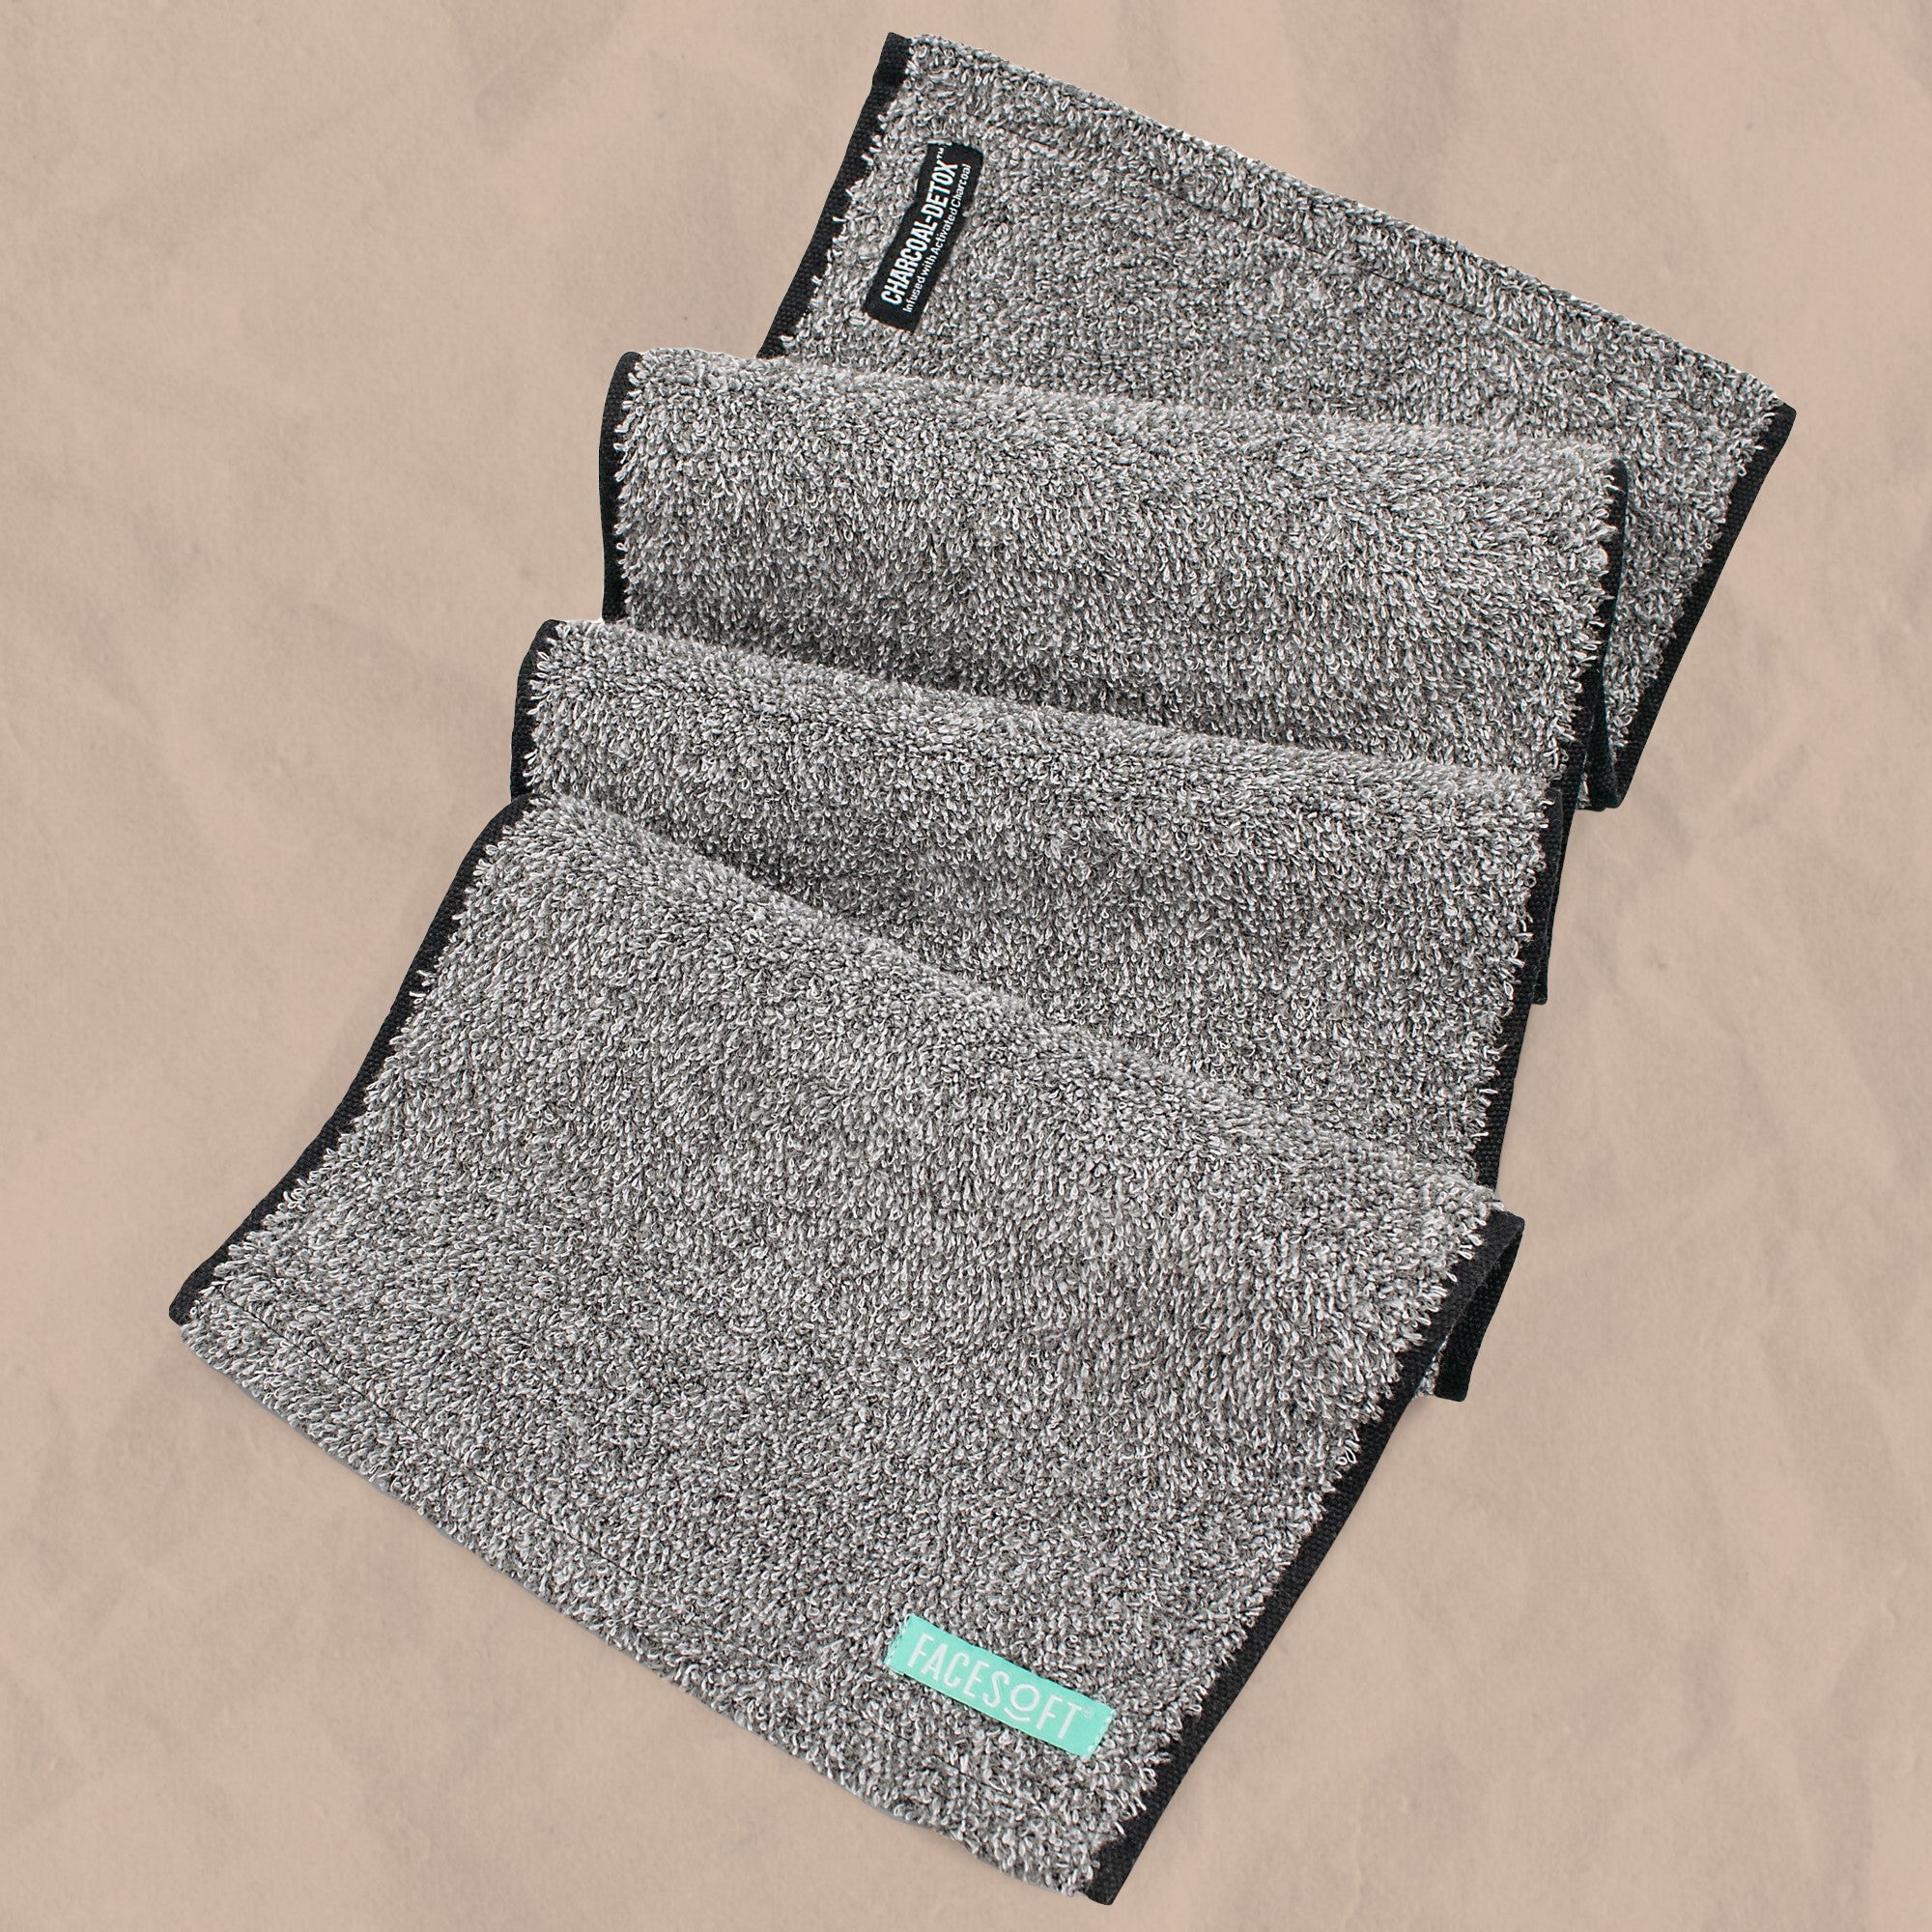 sweat towel yoga towel workout towel charcoal infused towel skincare patented technology 